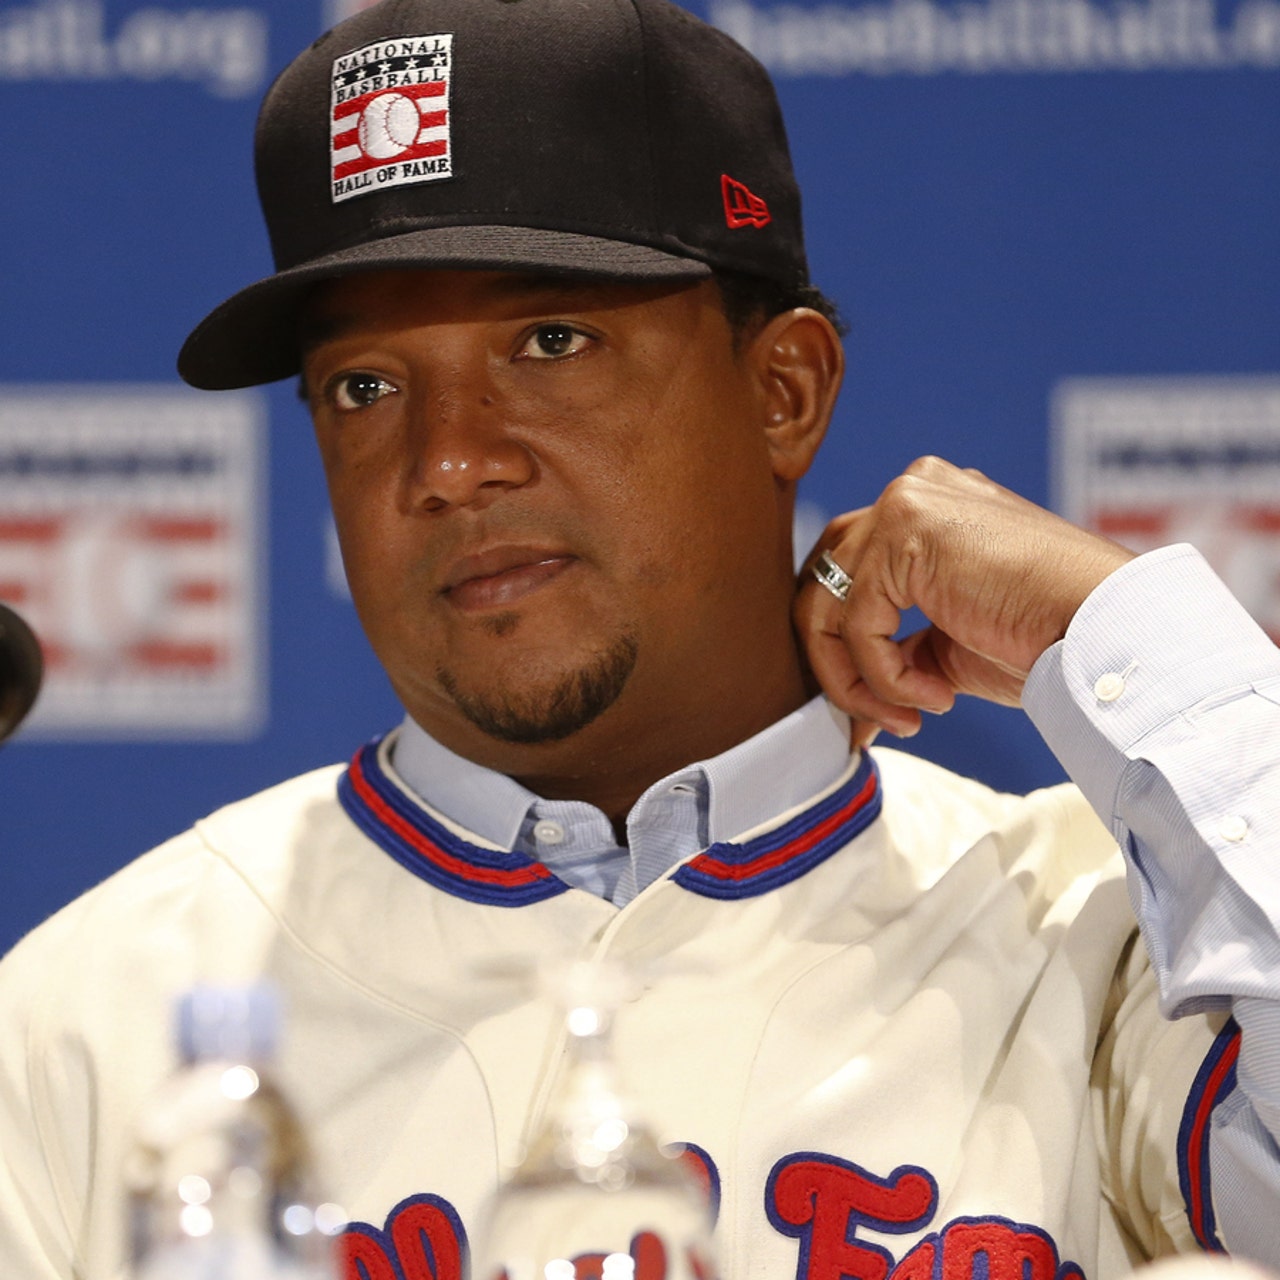 Pedro Martinez Still Wants To Bean Babe Ruth in the Ass (Or Maybe